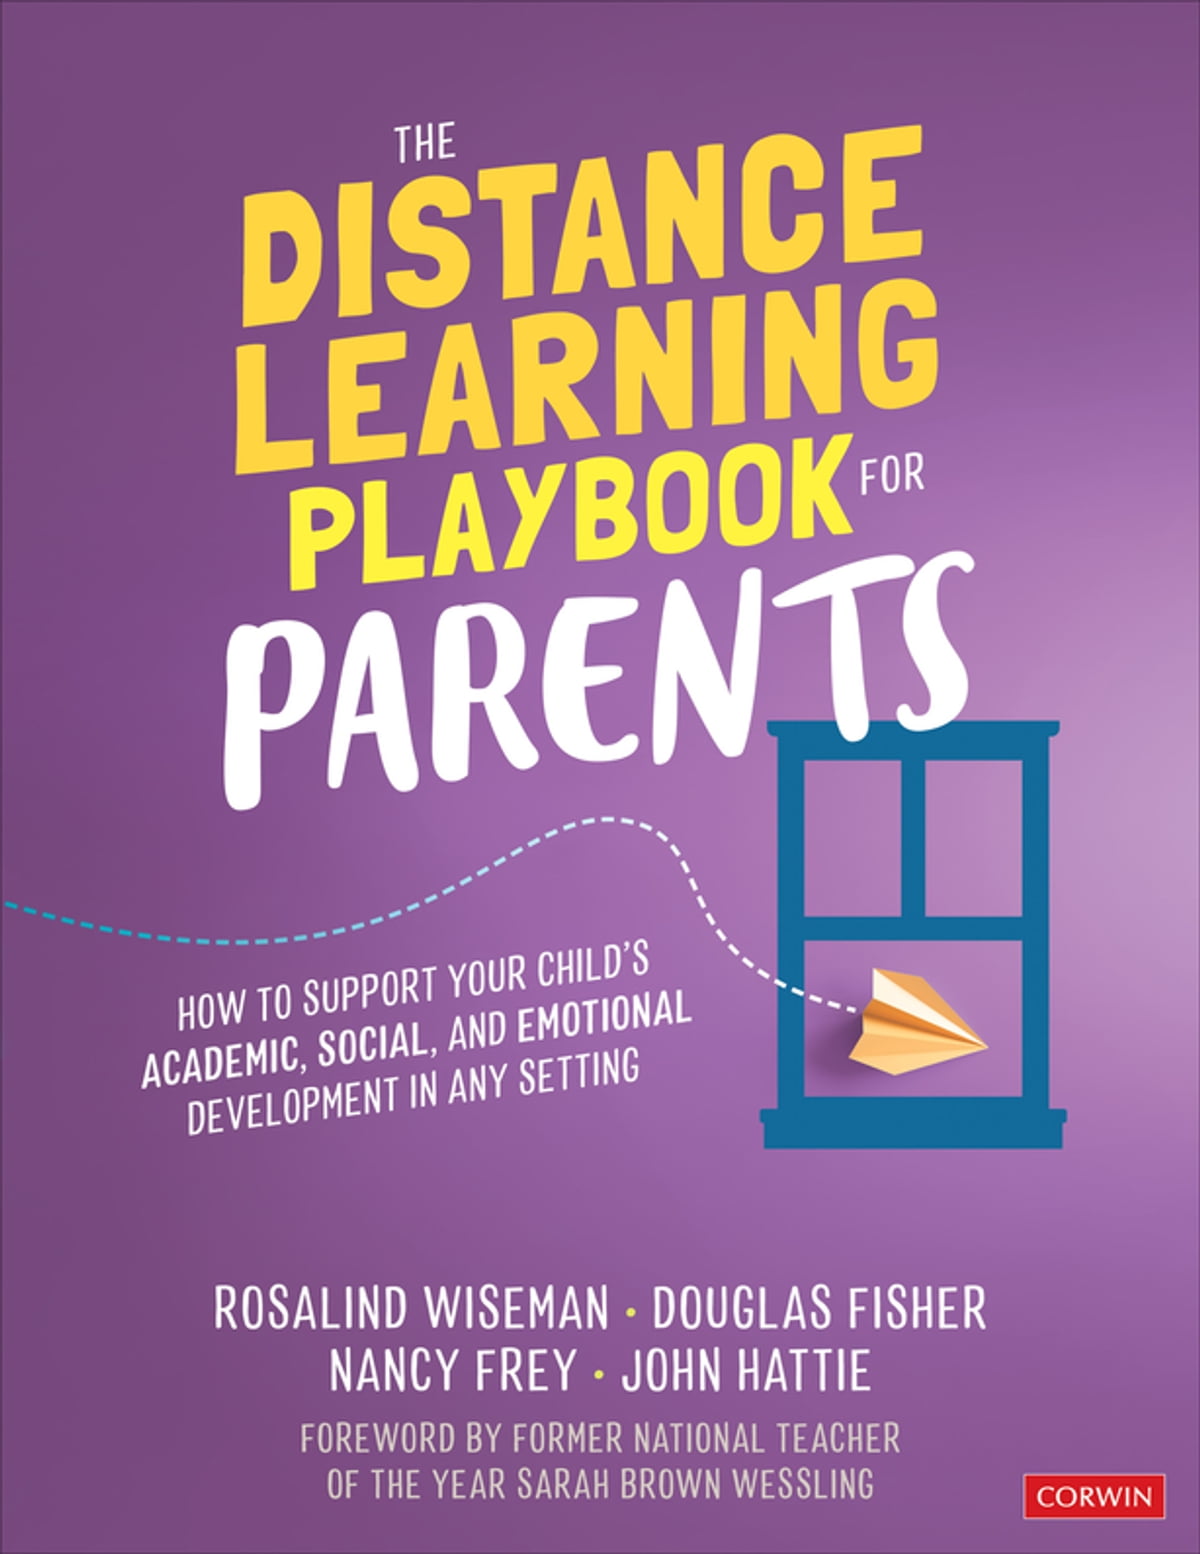 The Distance Learning Playbook for Parents by Rosalind Wiseman